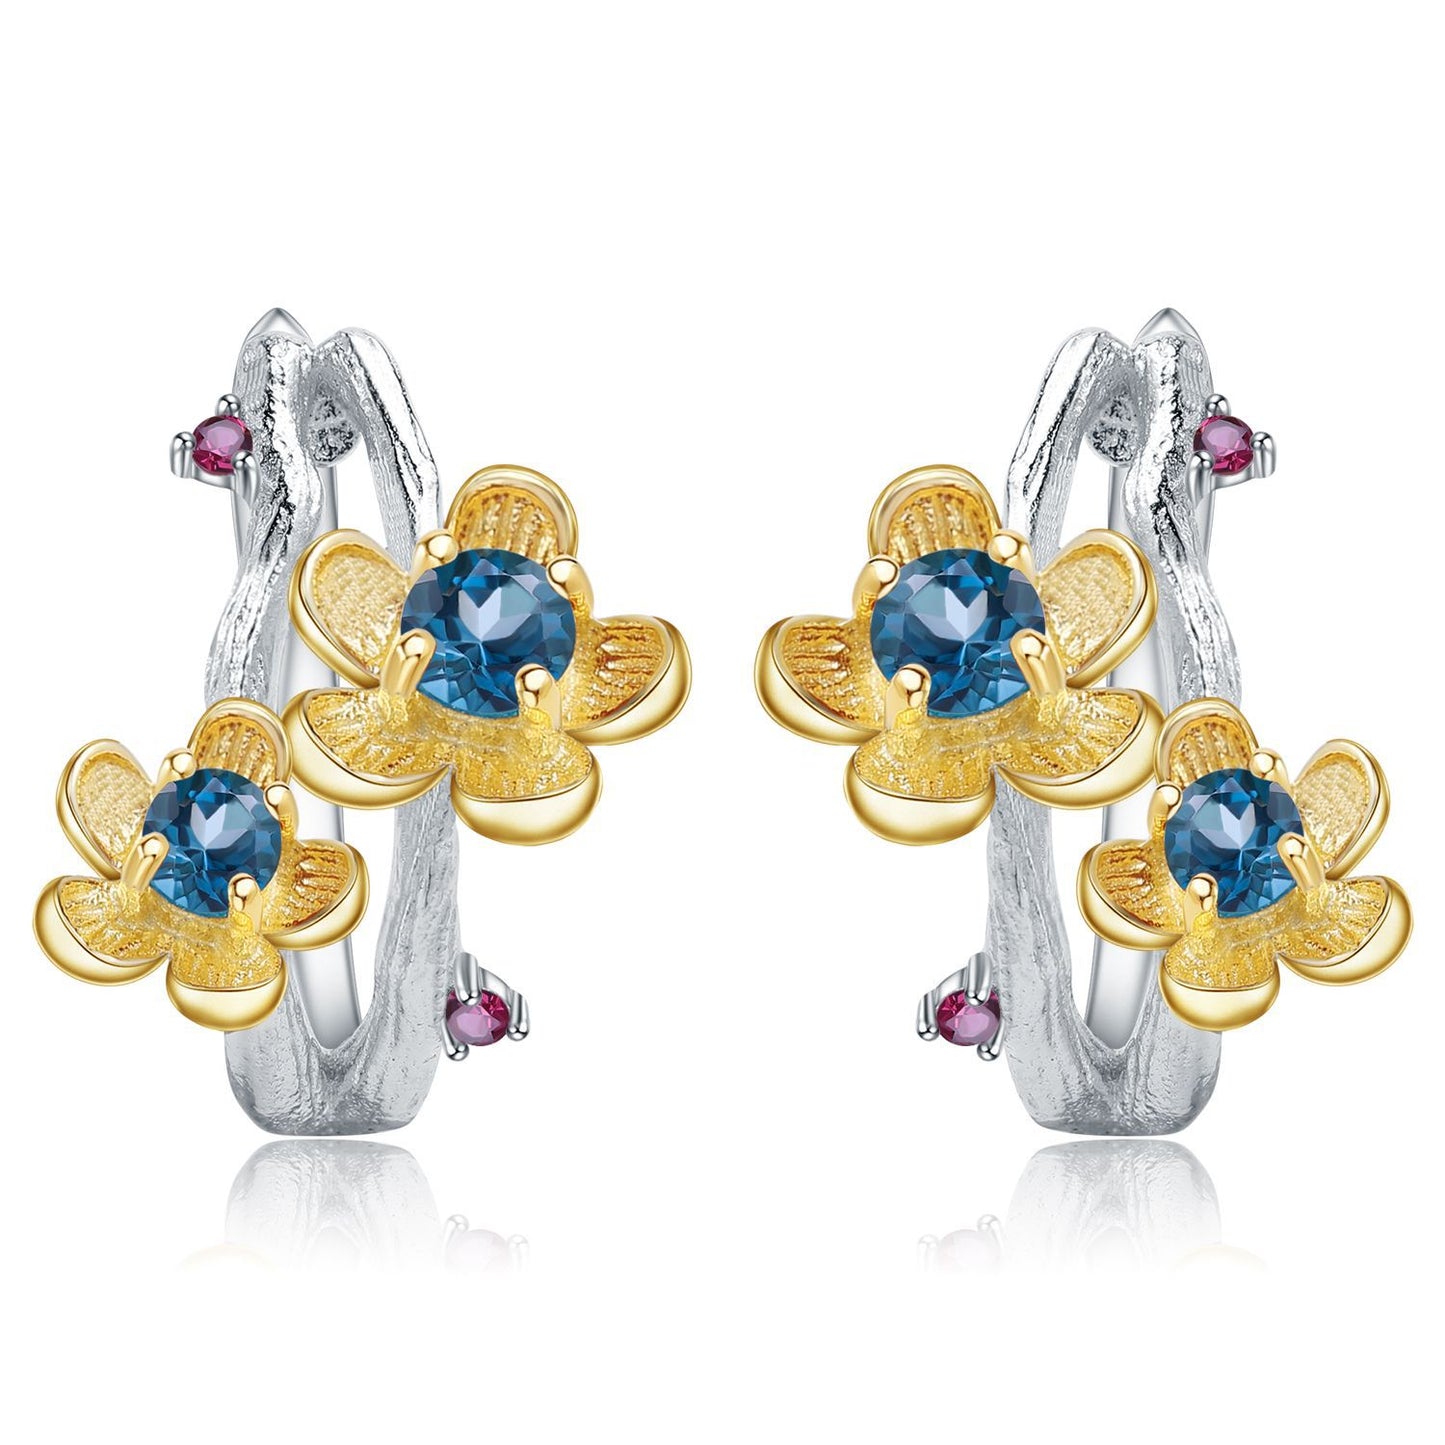 Colourful Gemstone Natural Floral Sterling Silver Studs Earrings for Women